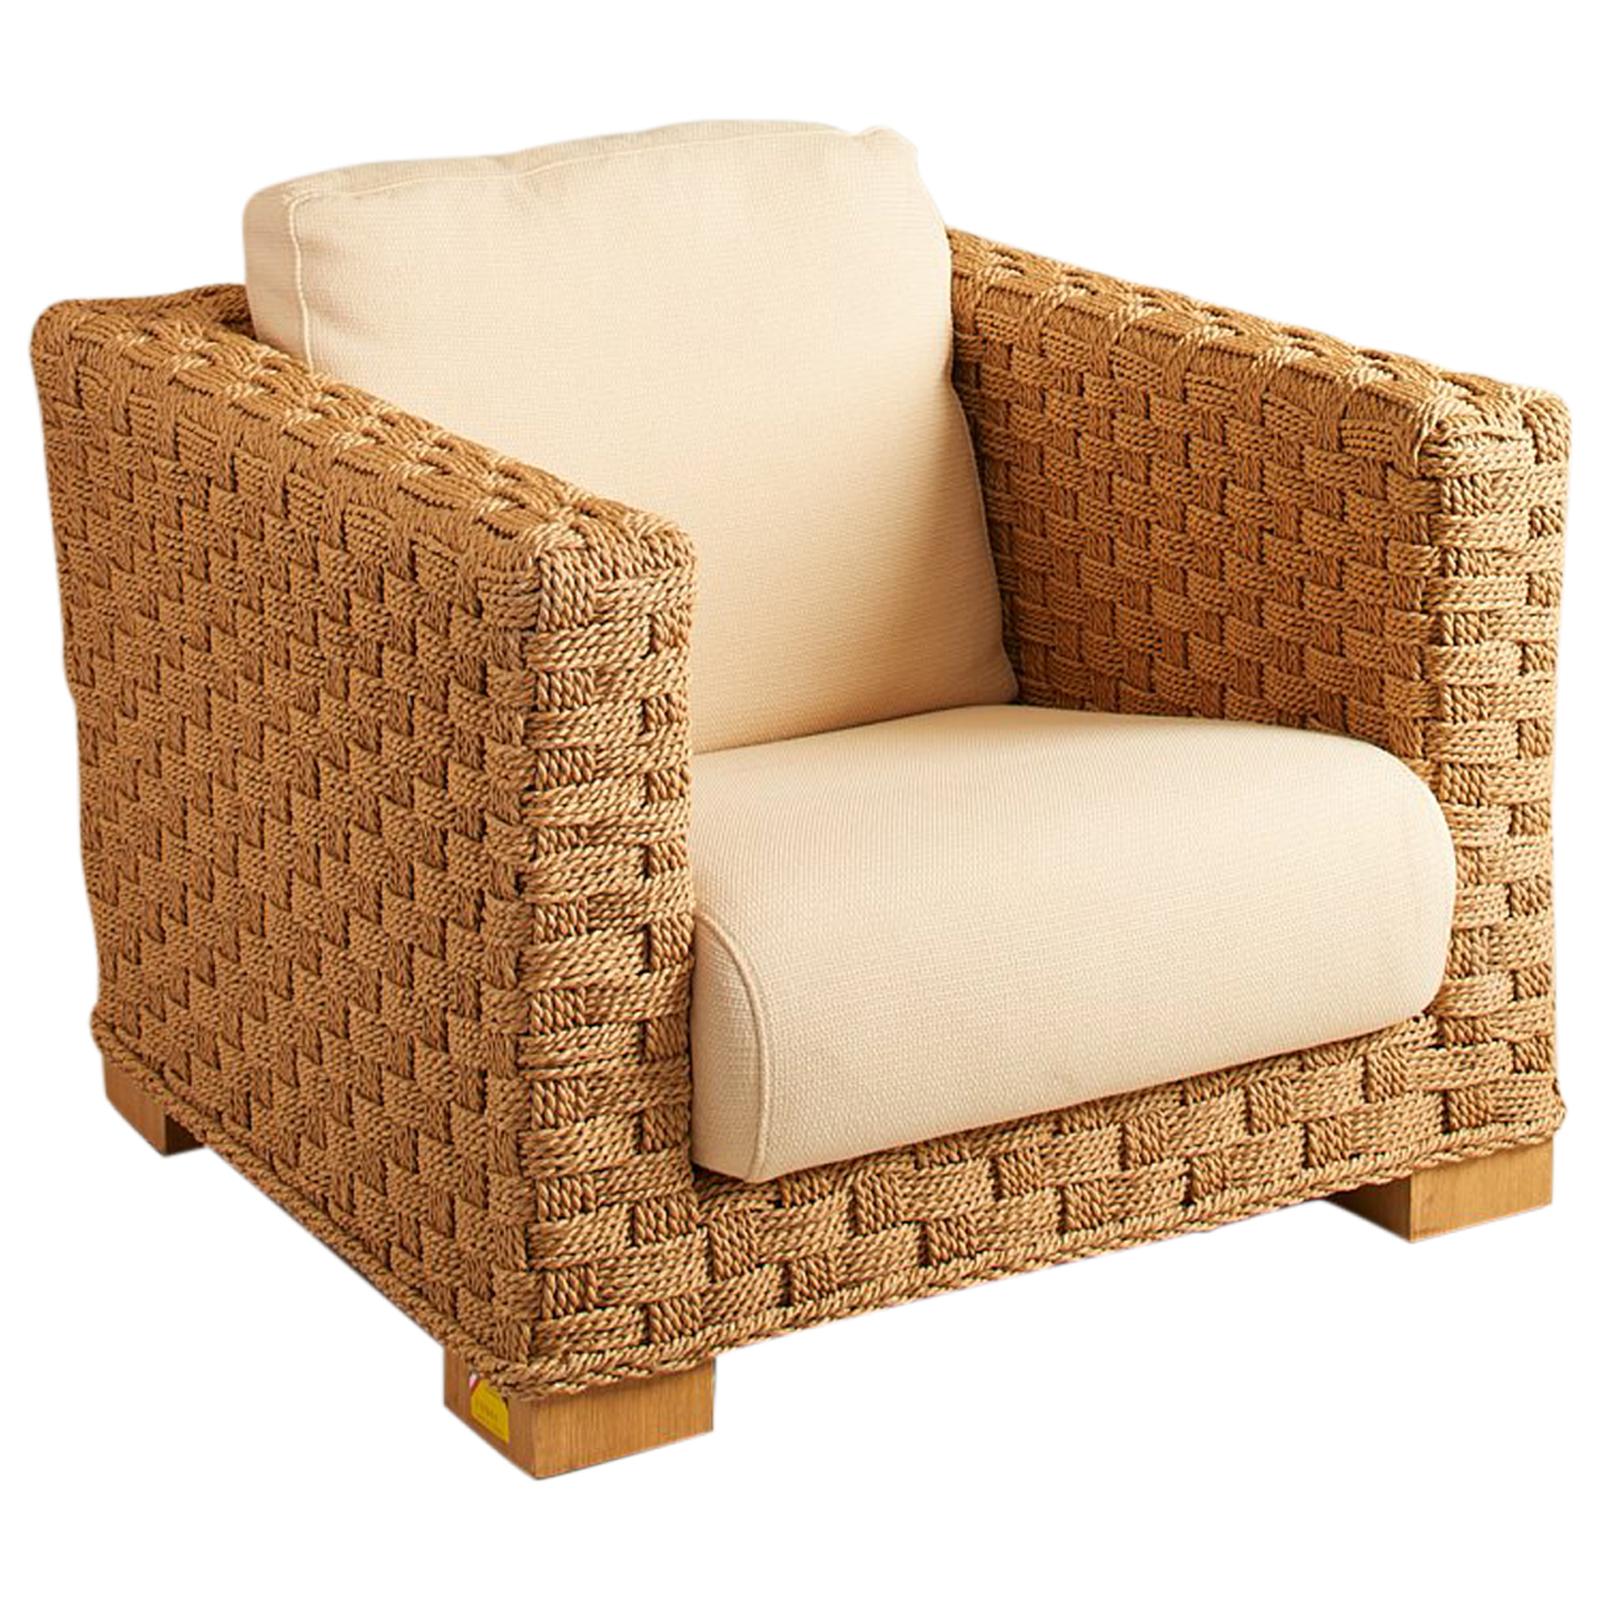 1960s French Woven Lounge Rope Chair